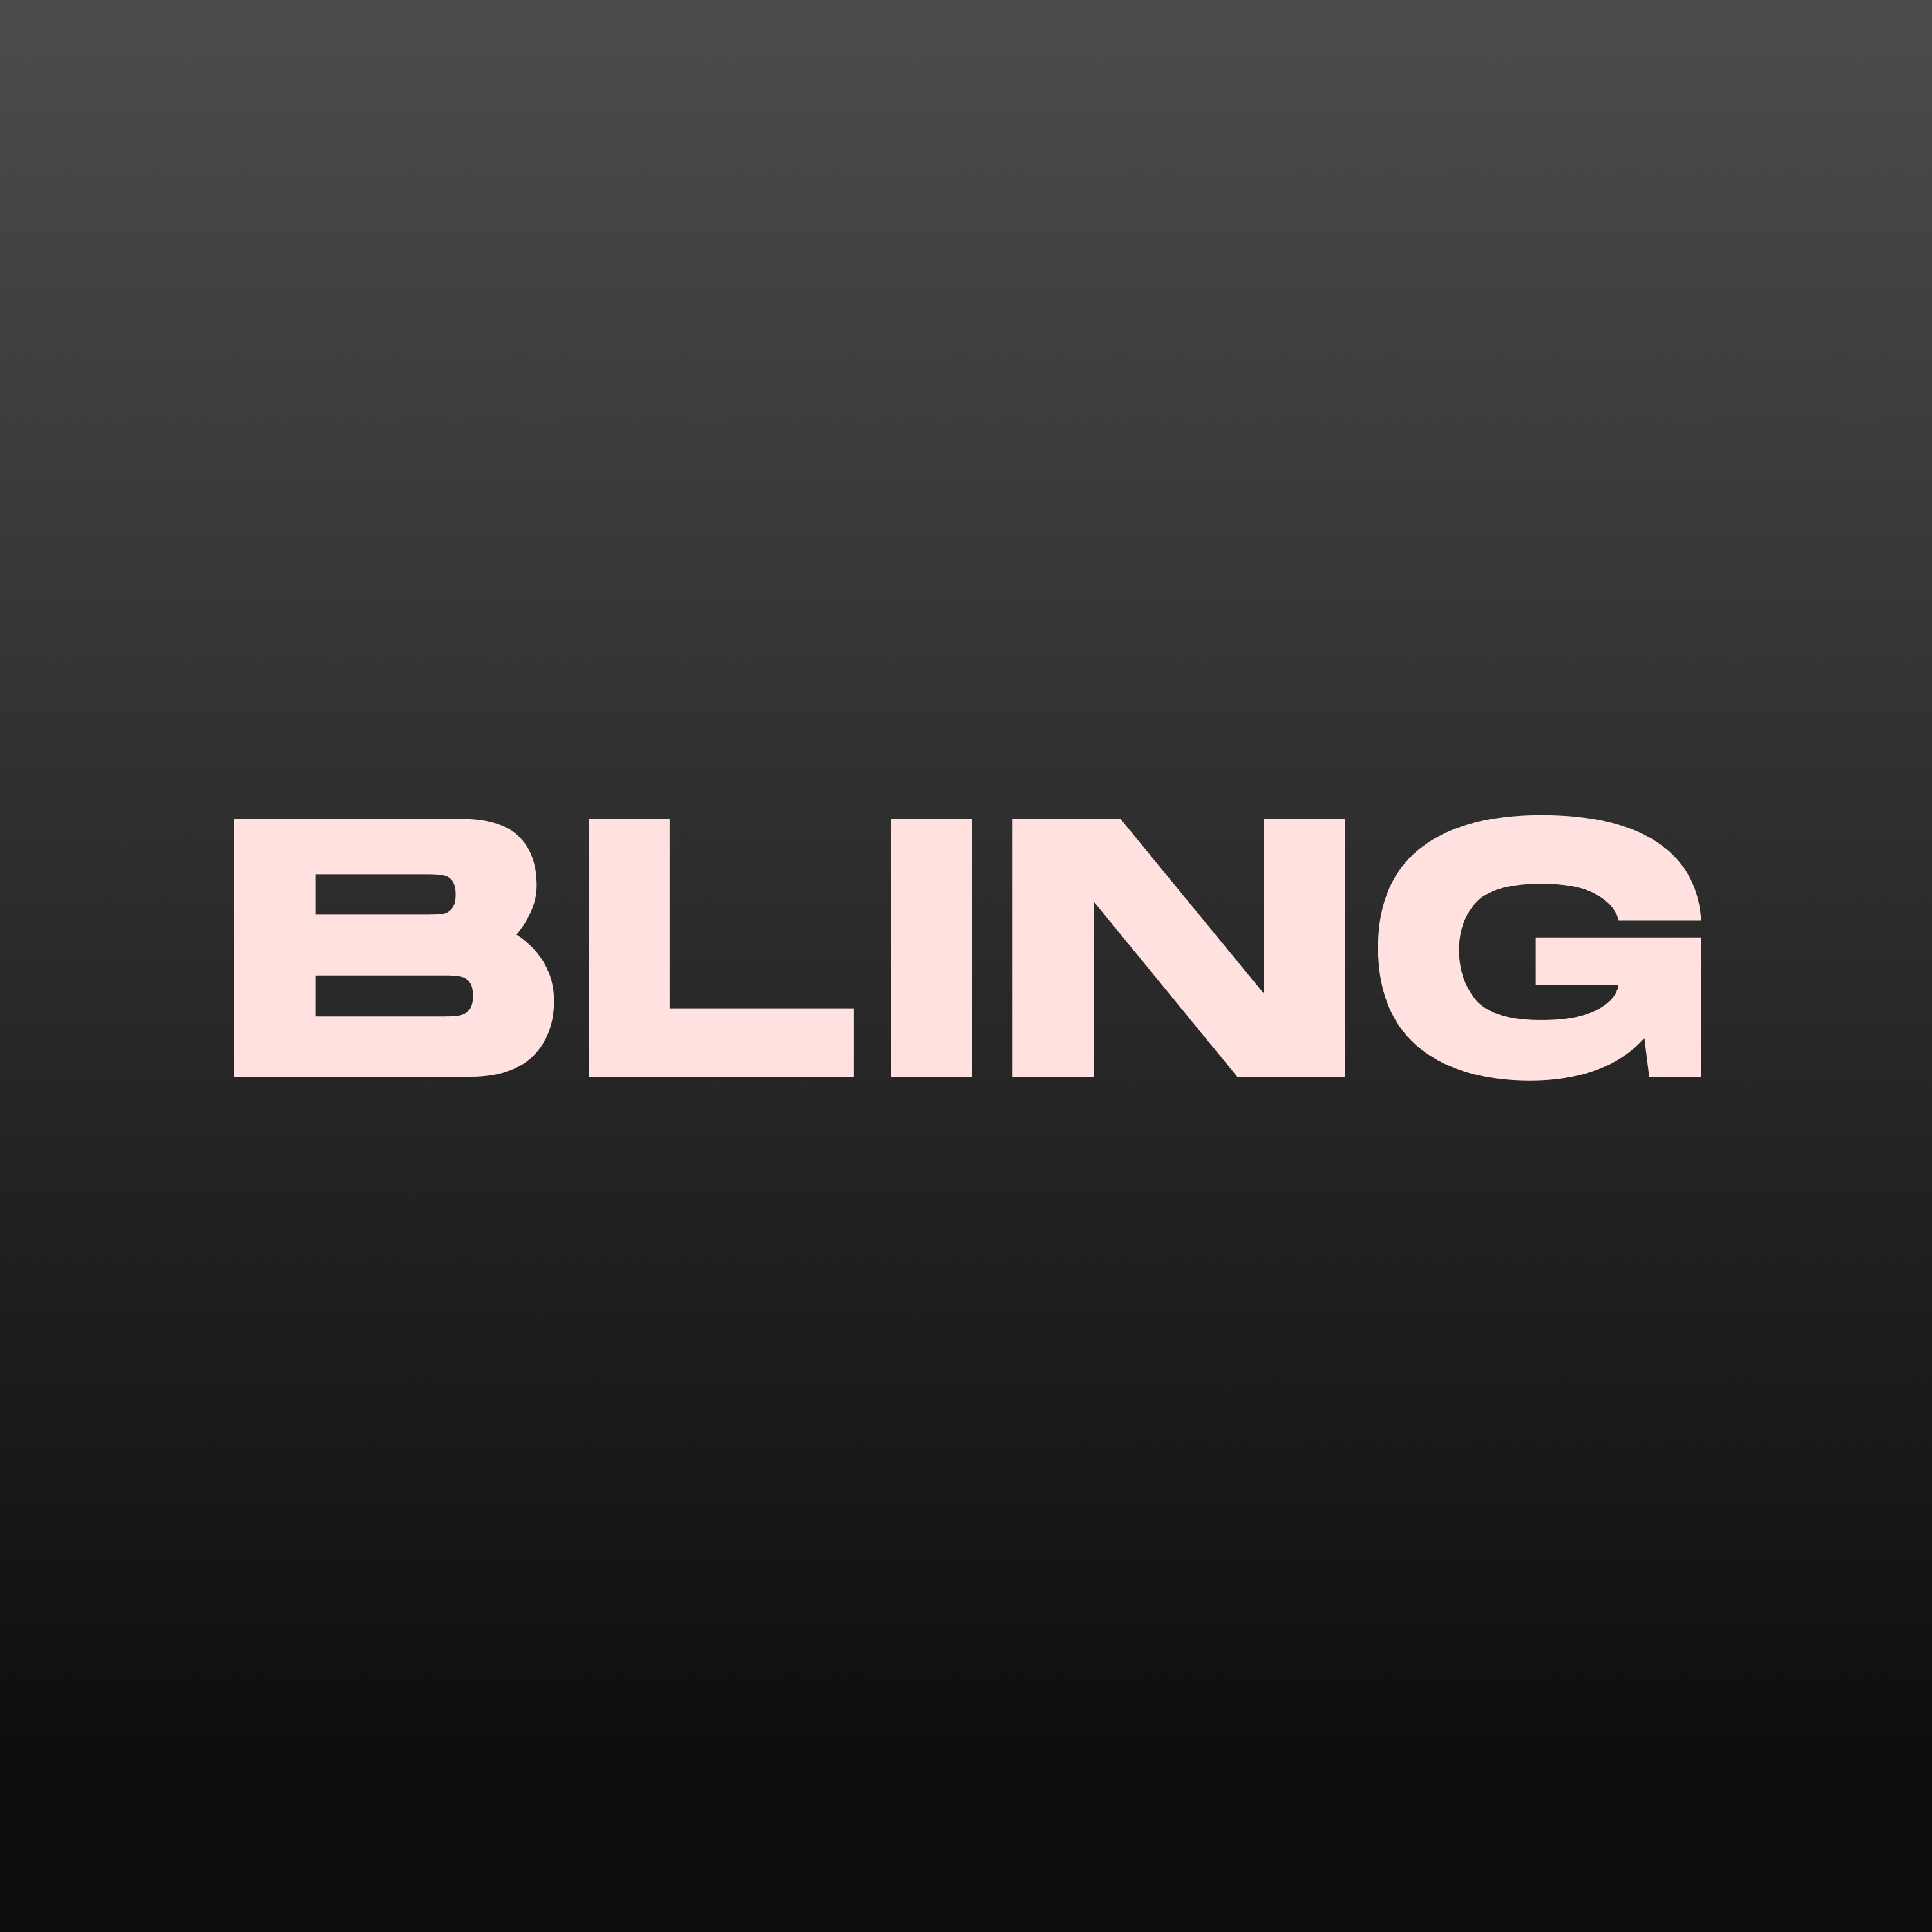 BLING - The end of financial stress